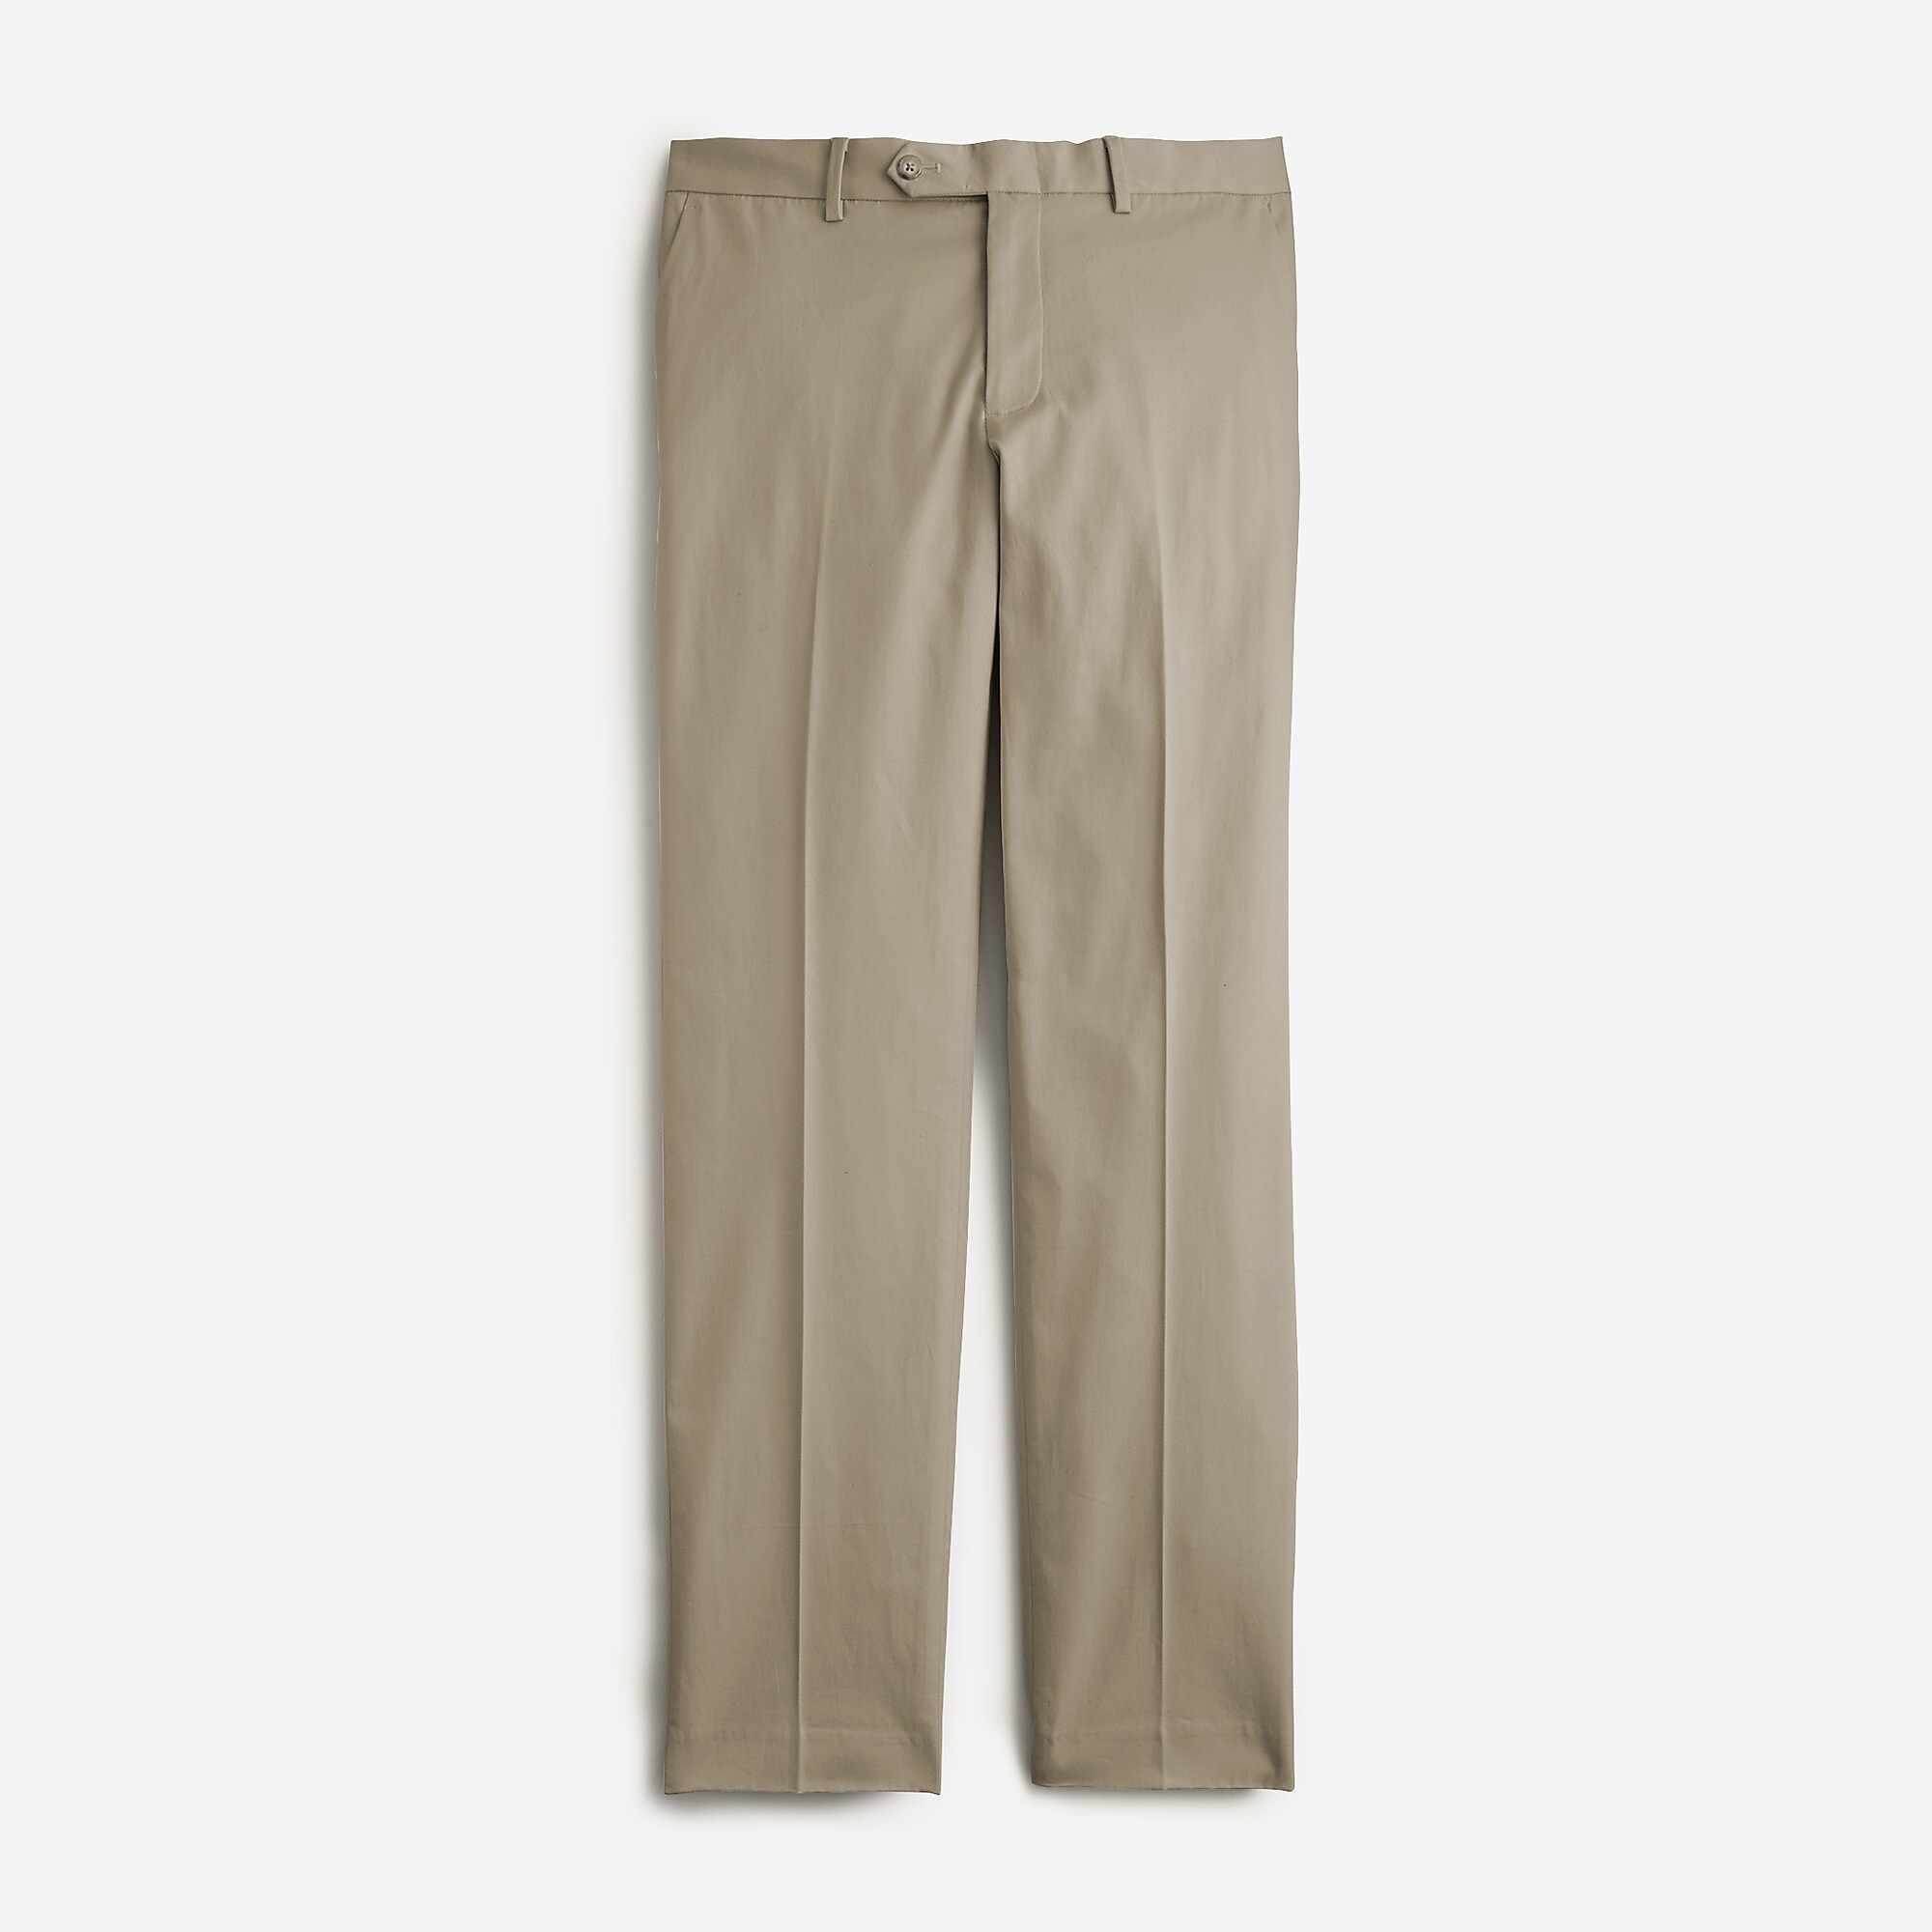 Bowery Slim-fit dress pant in stretch chino | J.Crew US